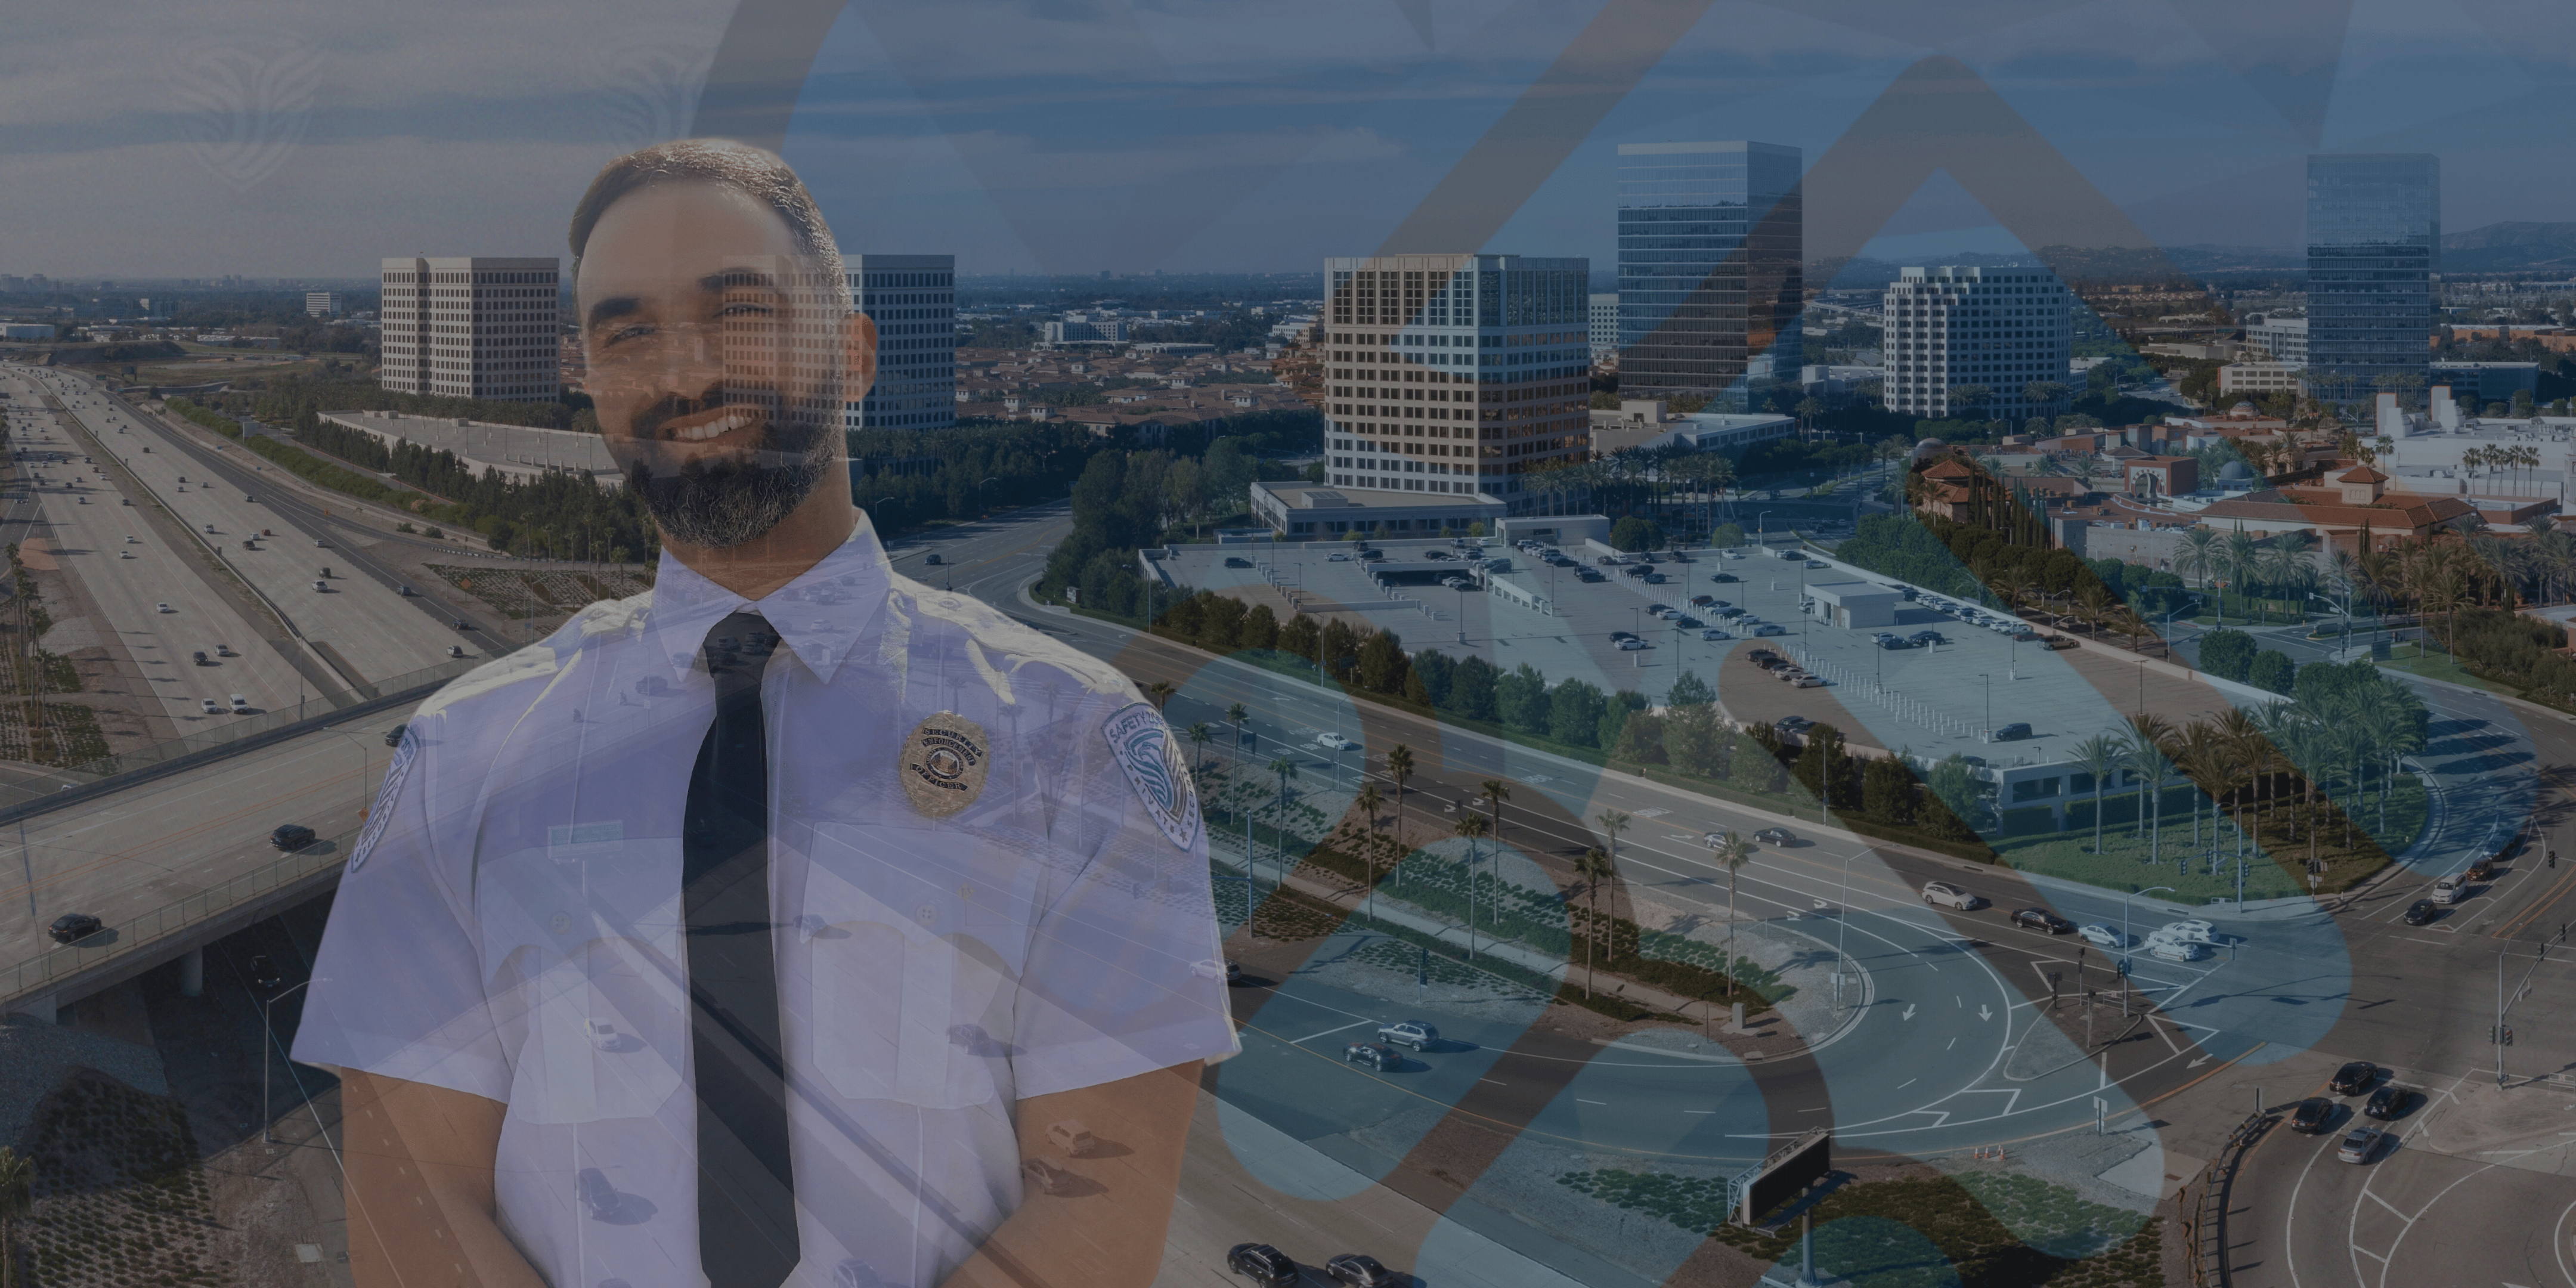 safety zone security guard provides guard services in orange county CA near 405 freeway and 5 freeway overpass.png__PID:901e4880-3a93-474f-9cc1-d4f9d54ea299